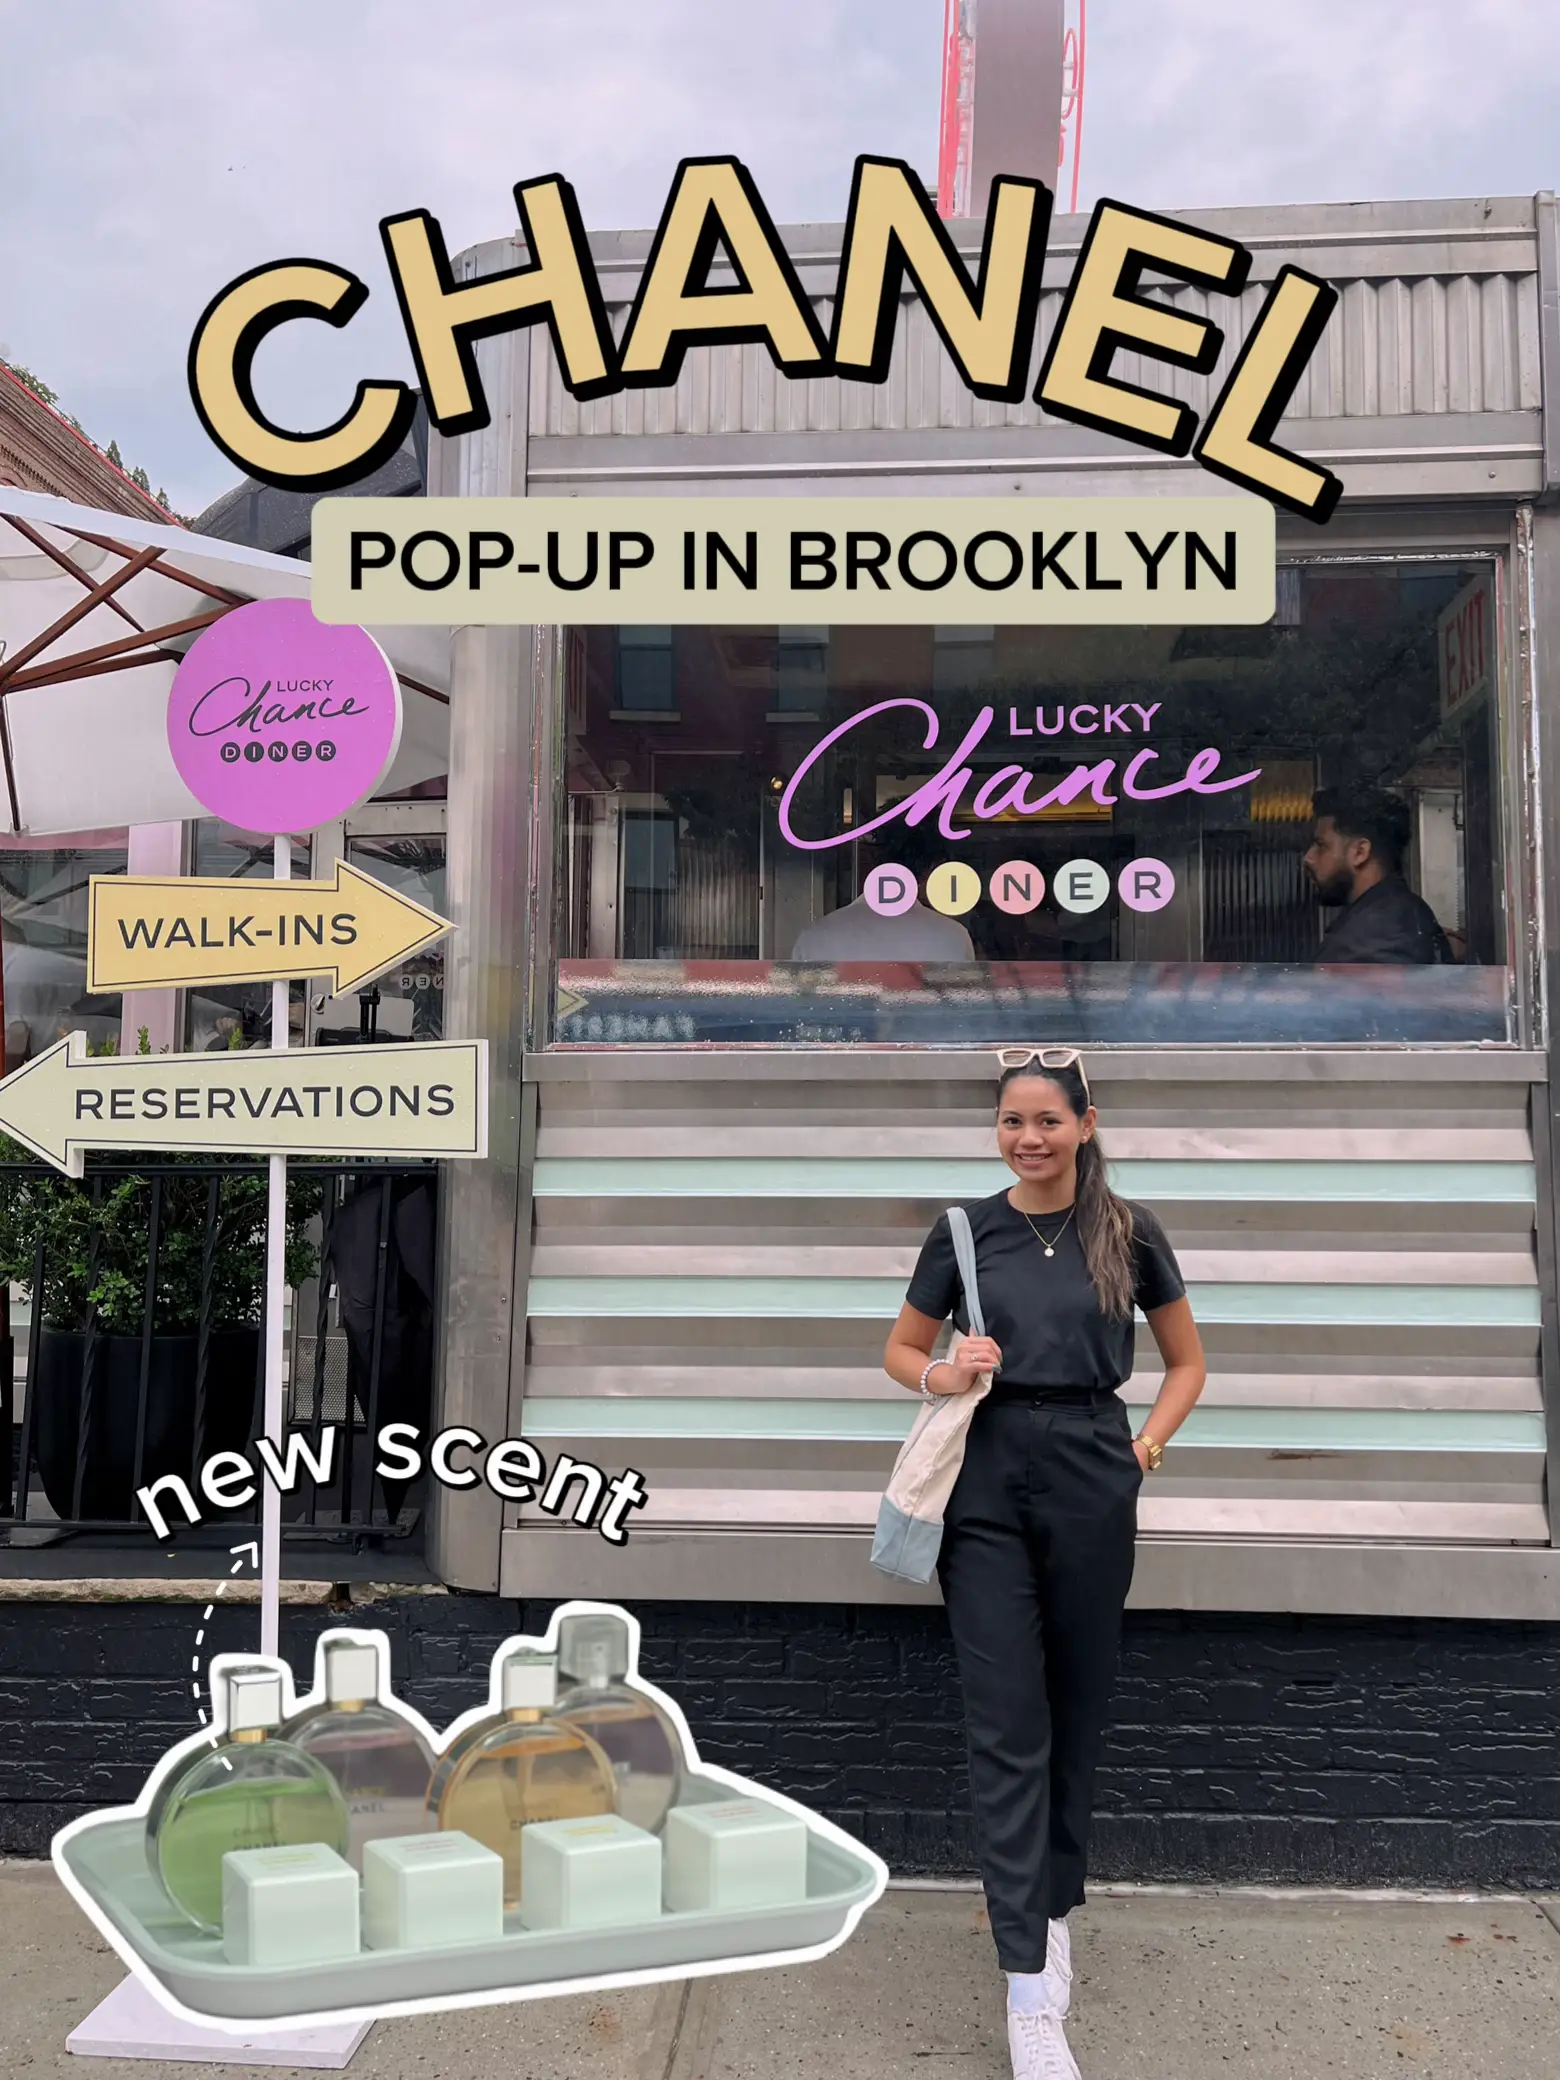 CHANEL Lucky Chance Diner Pop-Up Event, Gallery posted by FIN💗NYC